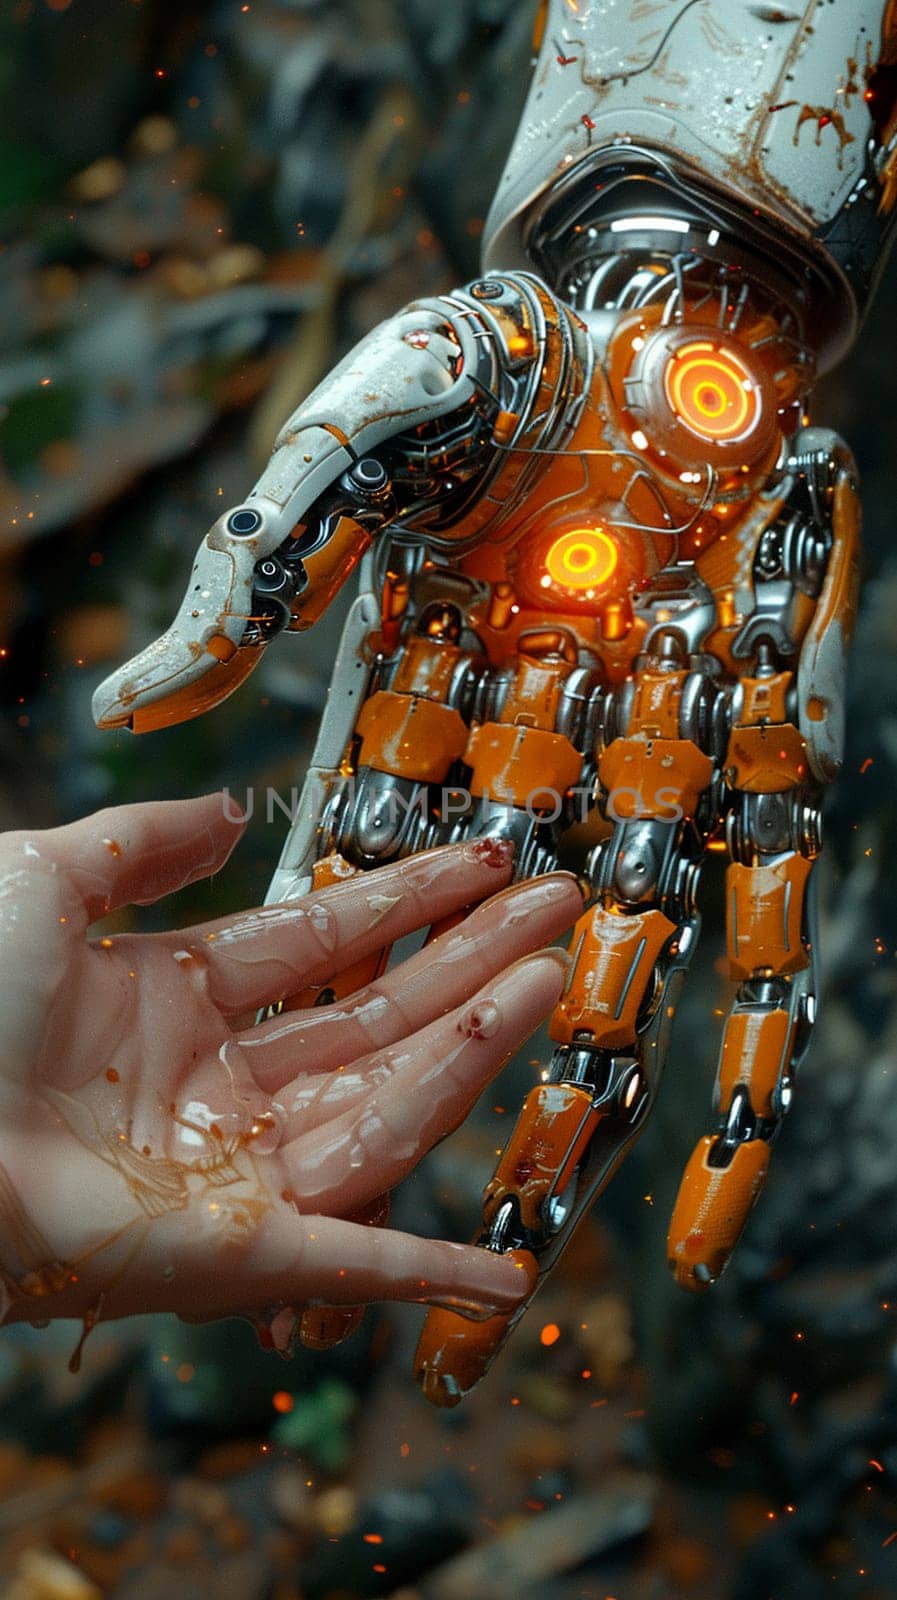 Robot's hand reaching out to a human, depicted in a 3D style exploring the bond between man and machine.